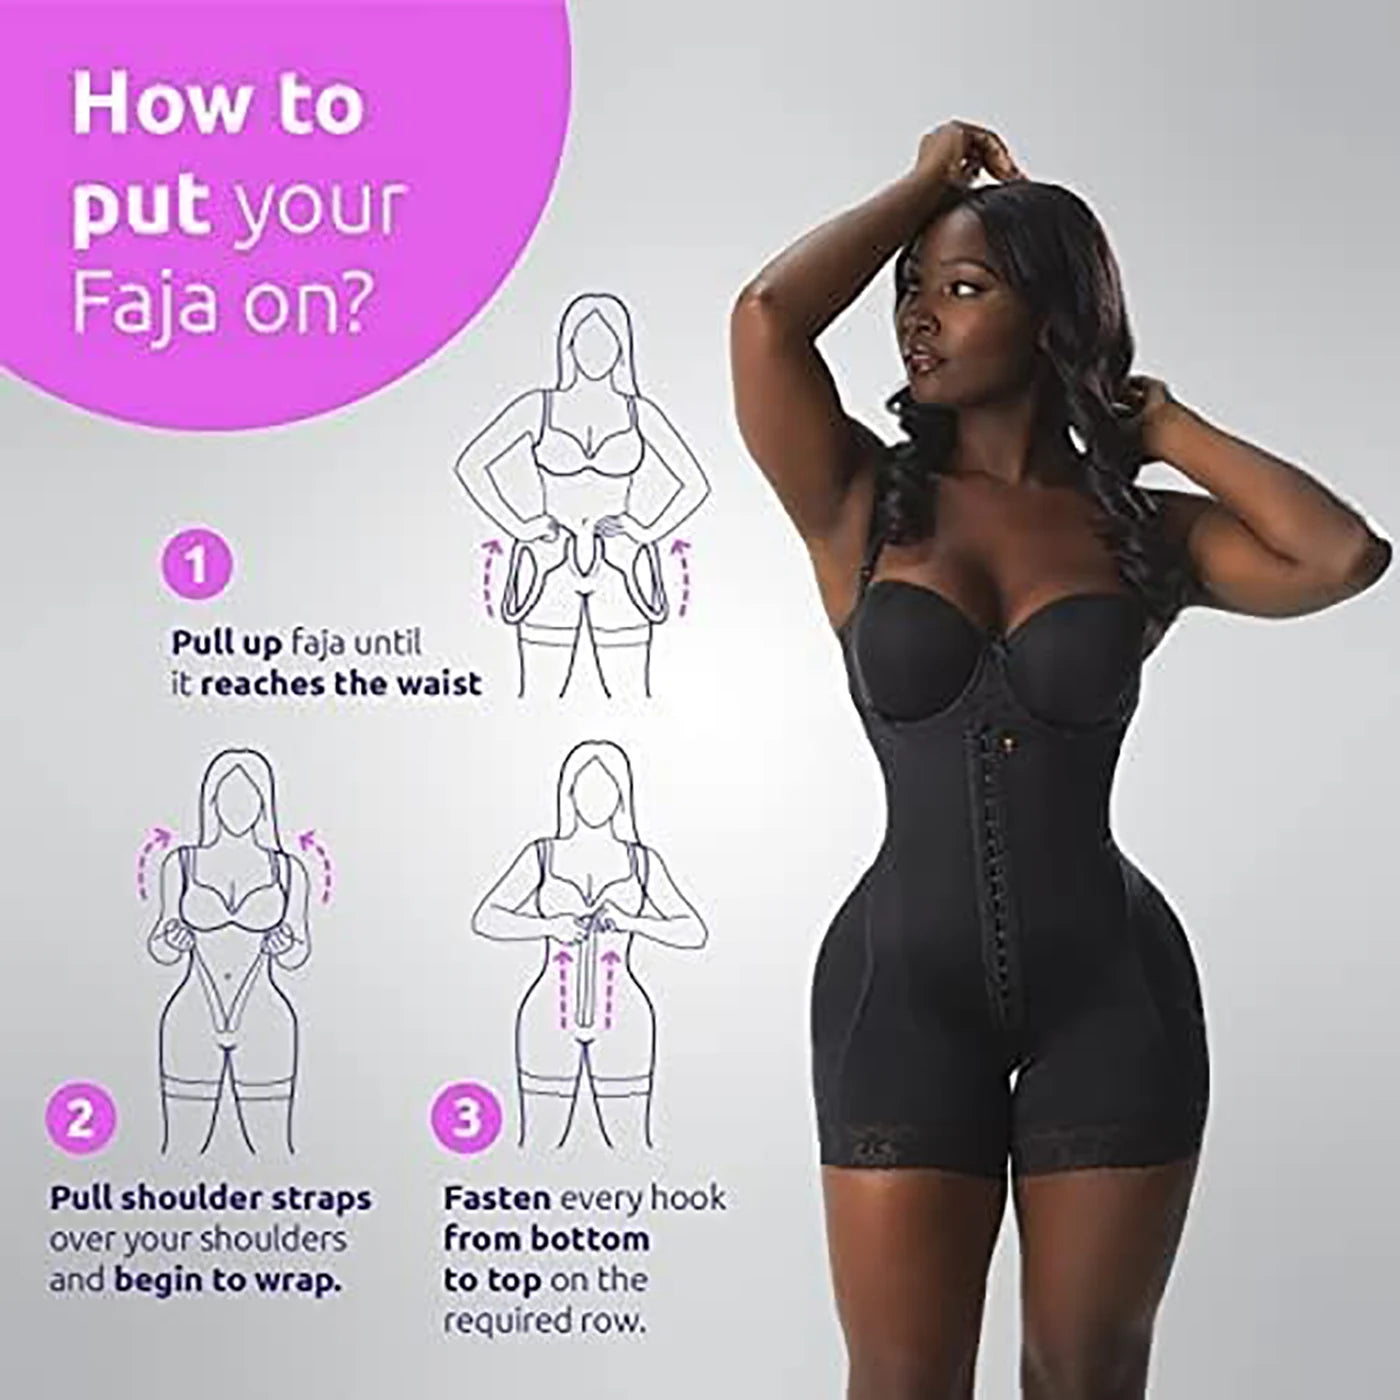 Introducing the Mapia invisible 002 Fajas body shaper …. This body